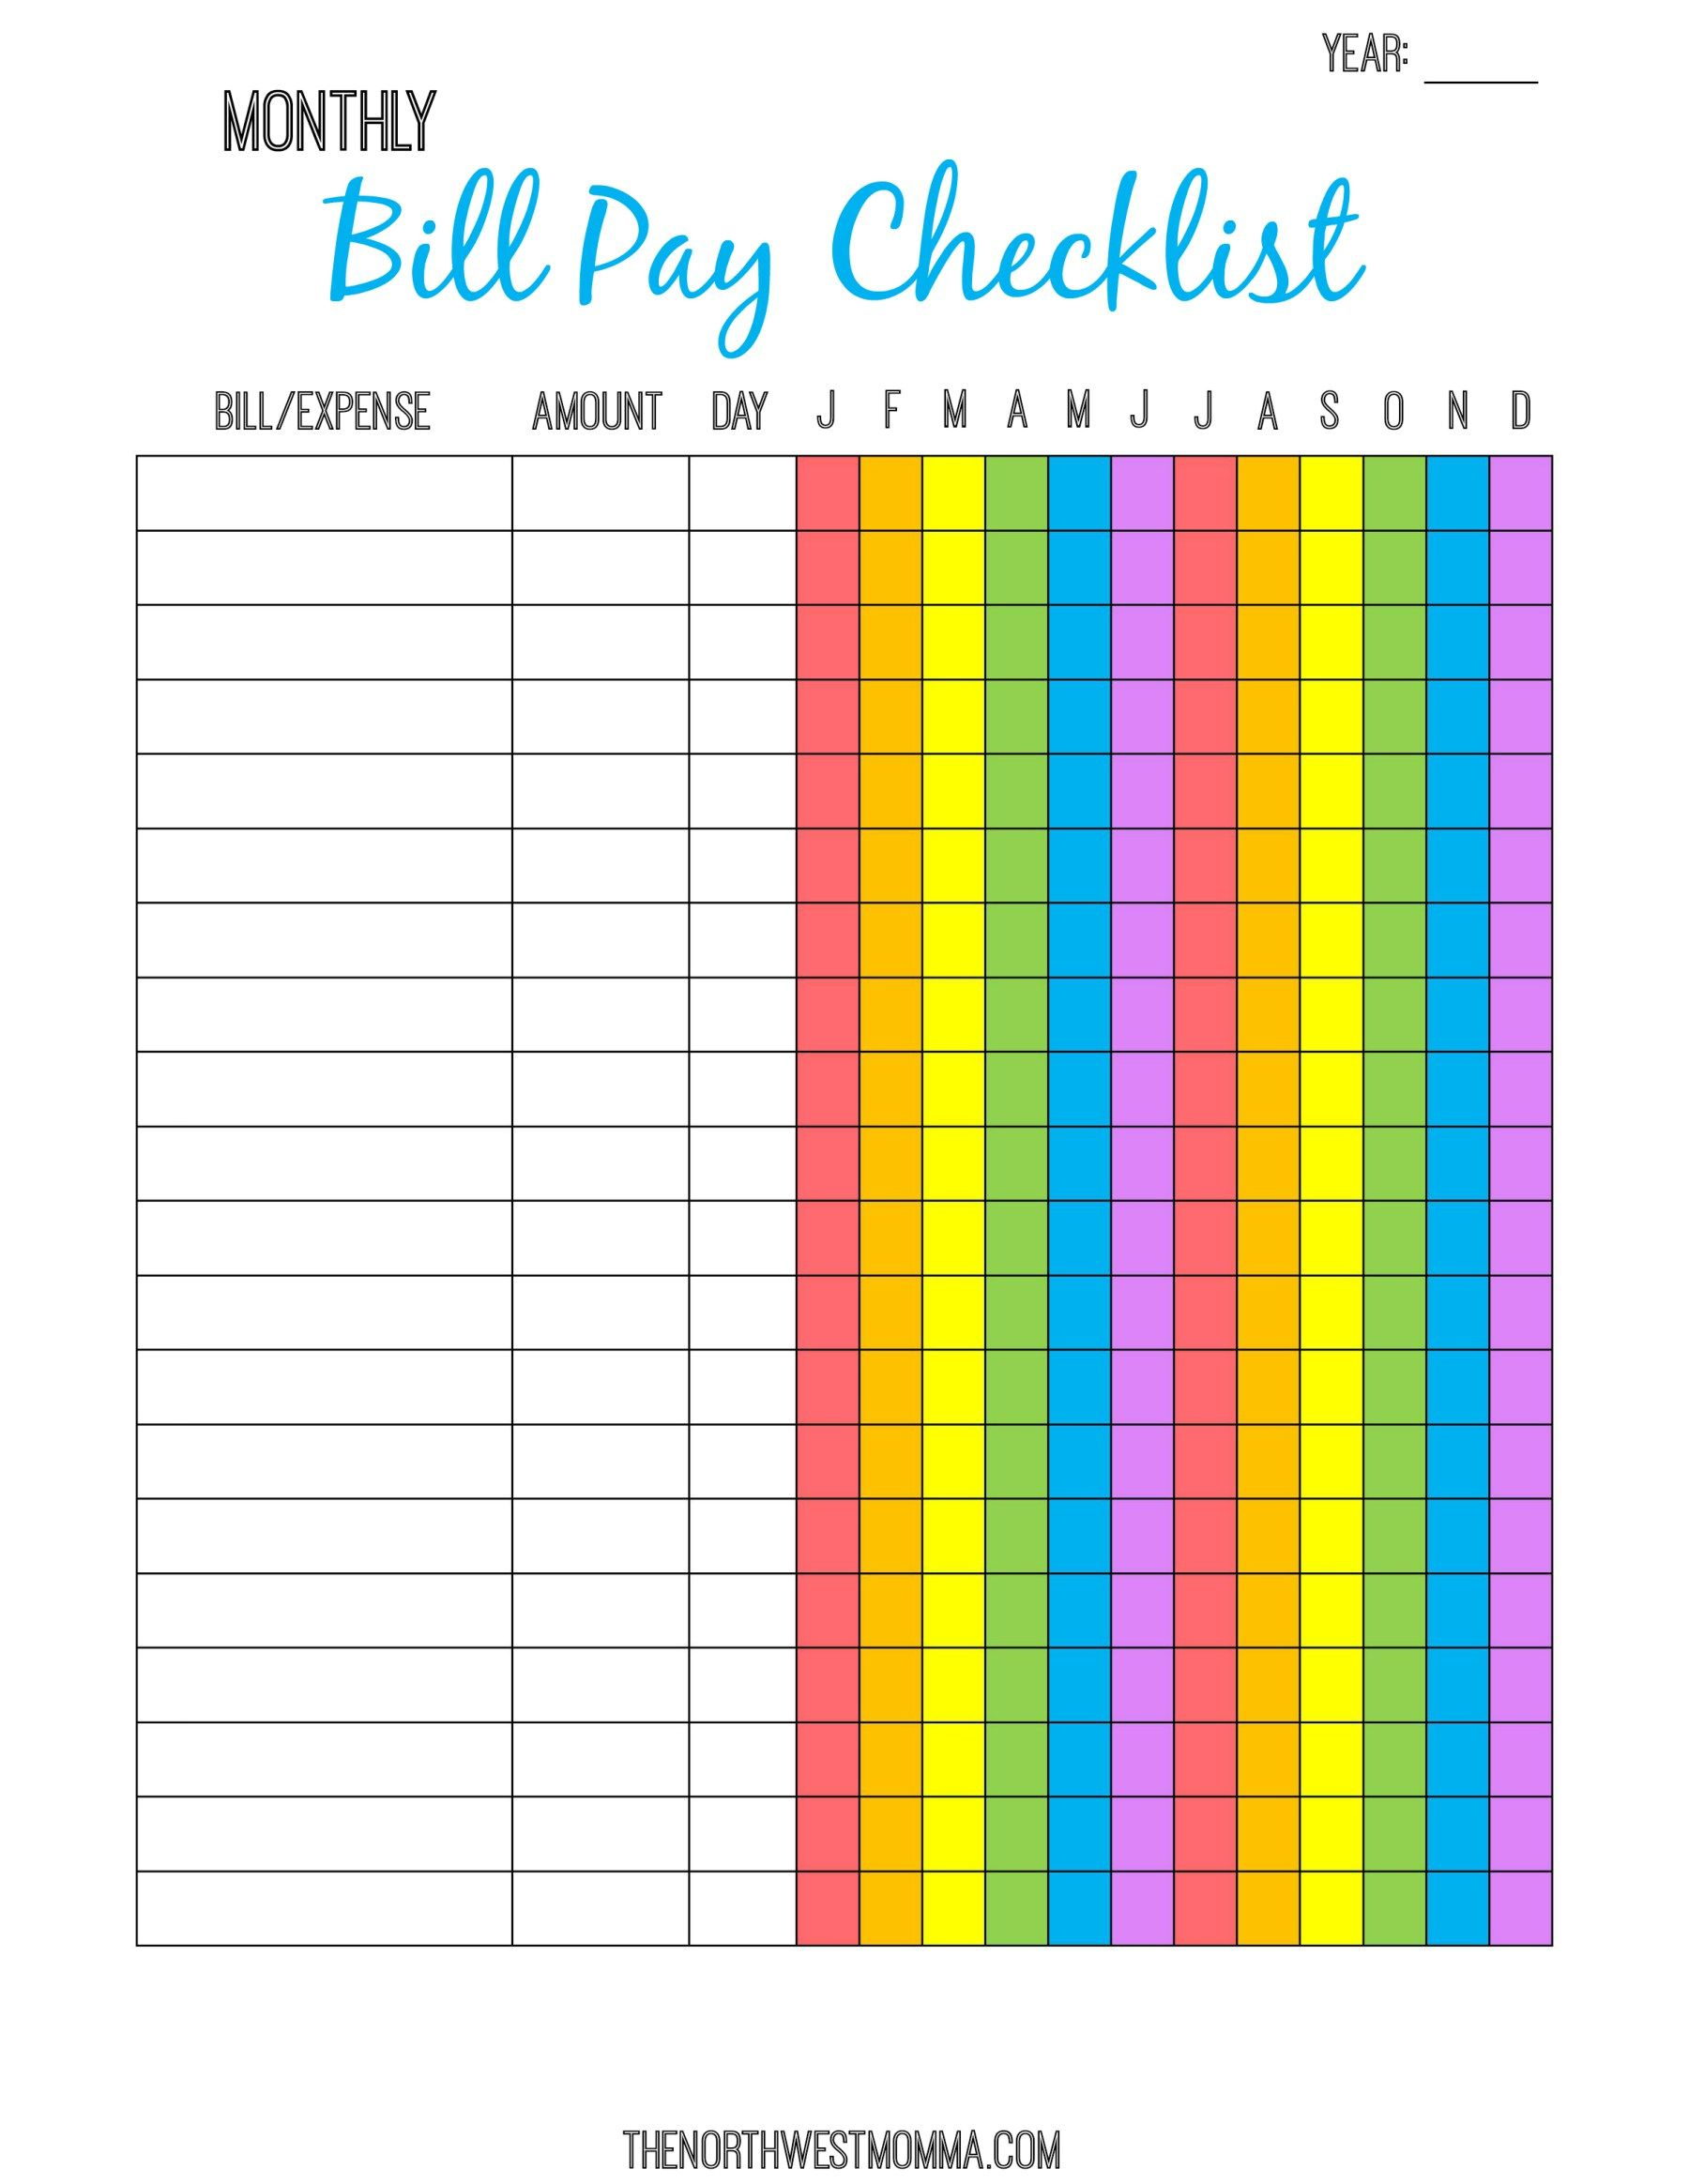 Monthly Bill Pay Checklist- Free Printable | $ Saving Money - Free Printable Bill Checklist